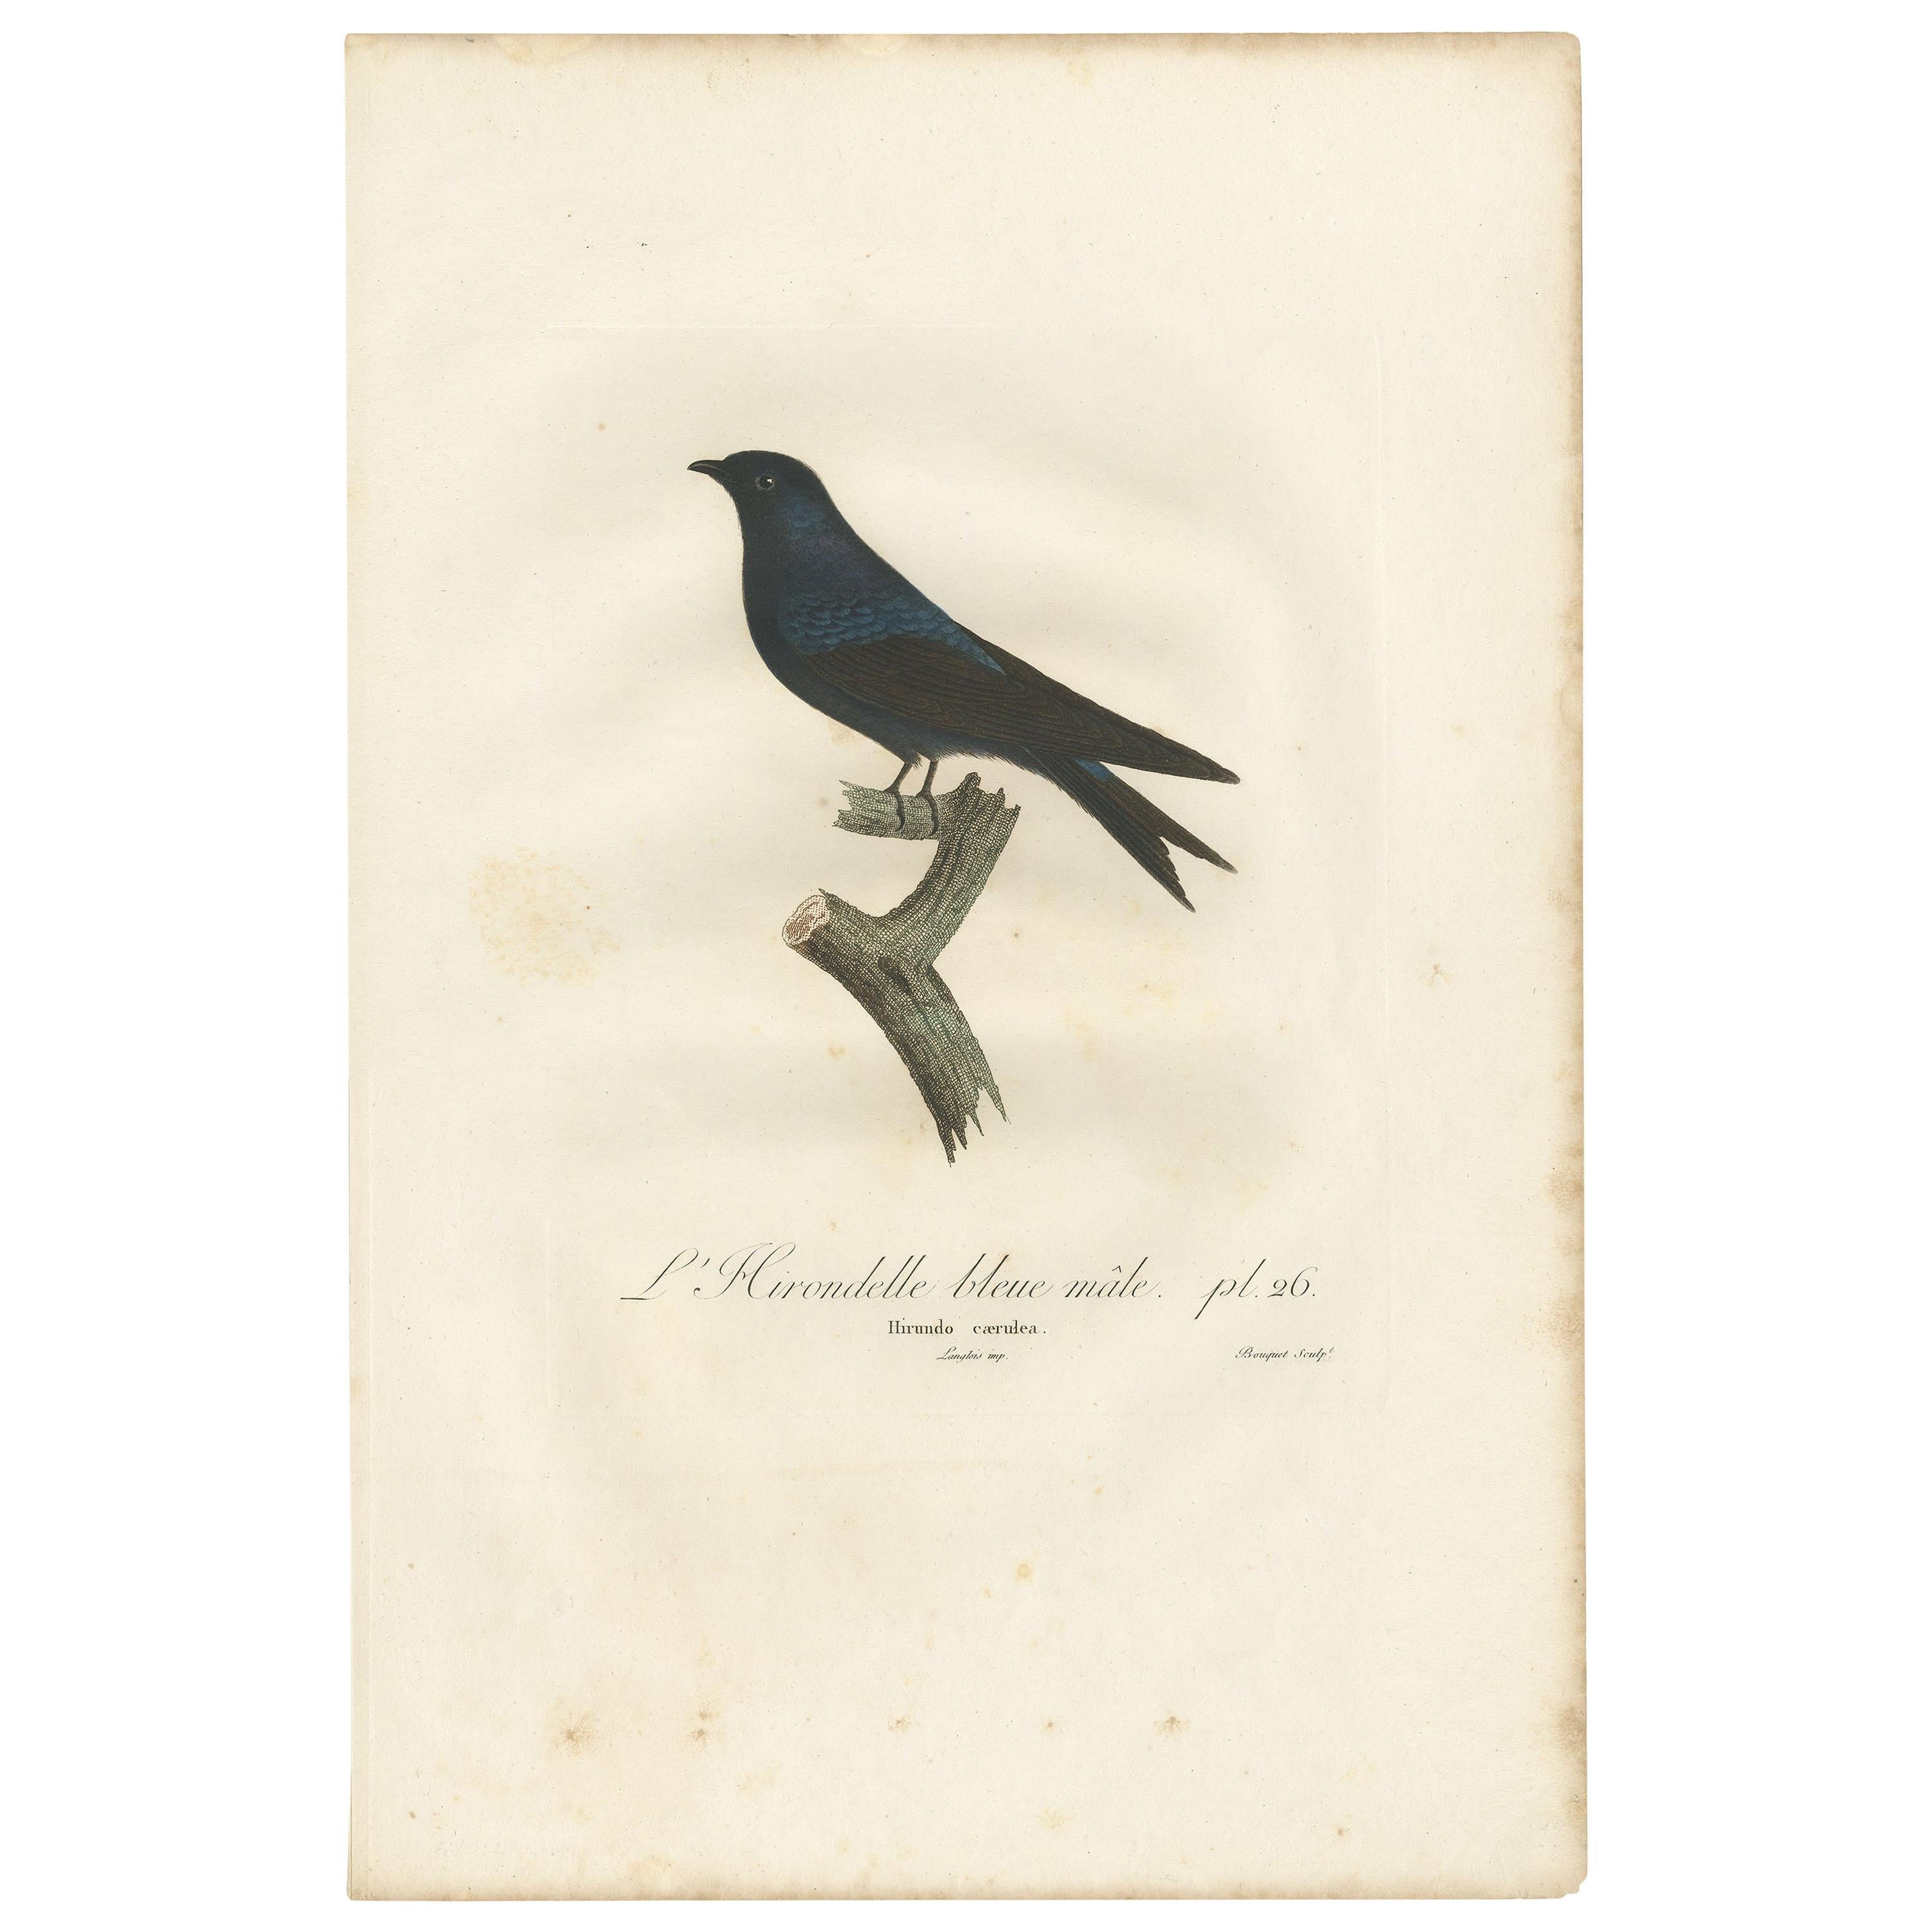 Antique Bird Print of the Blue Swallow by Vieillot, 1807